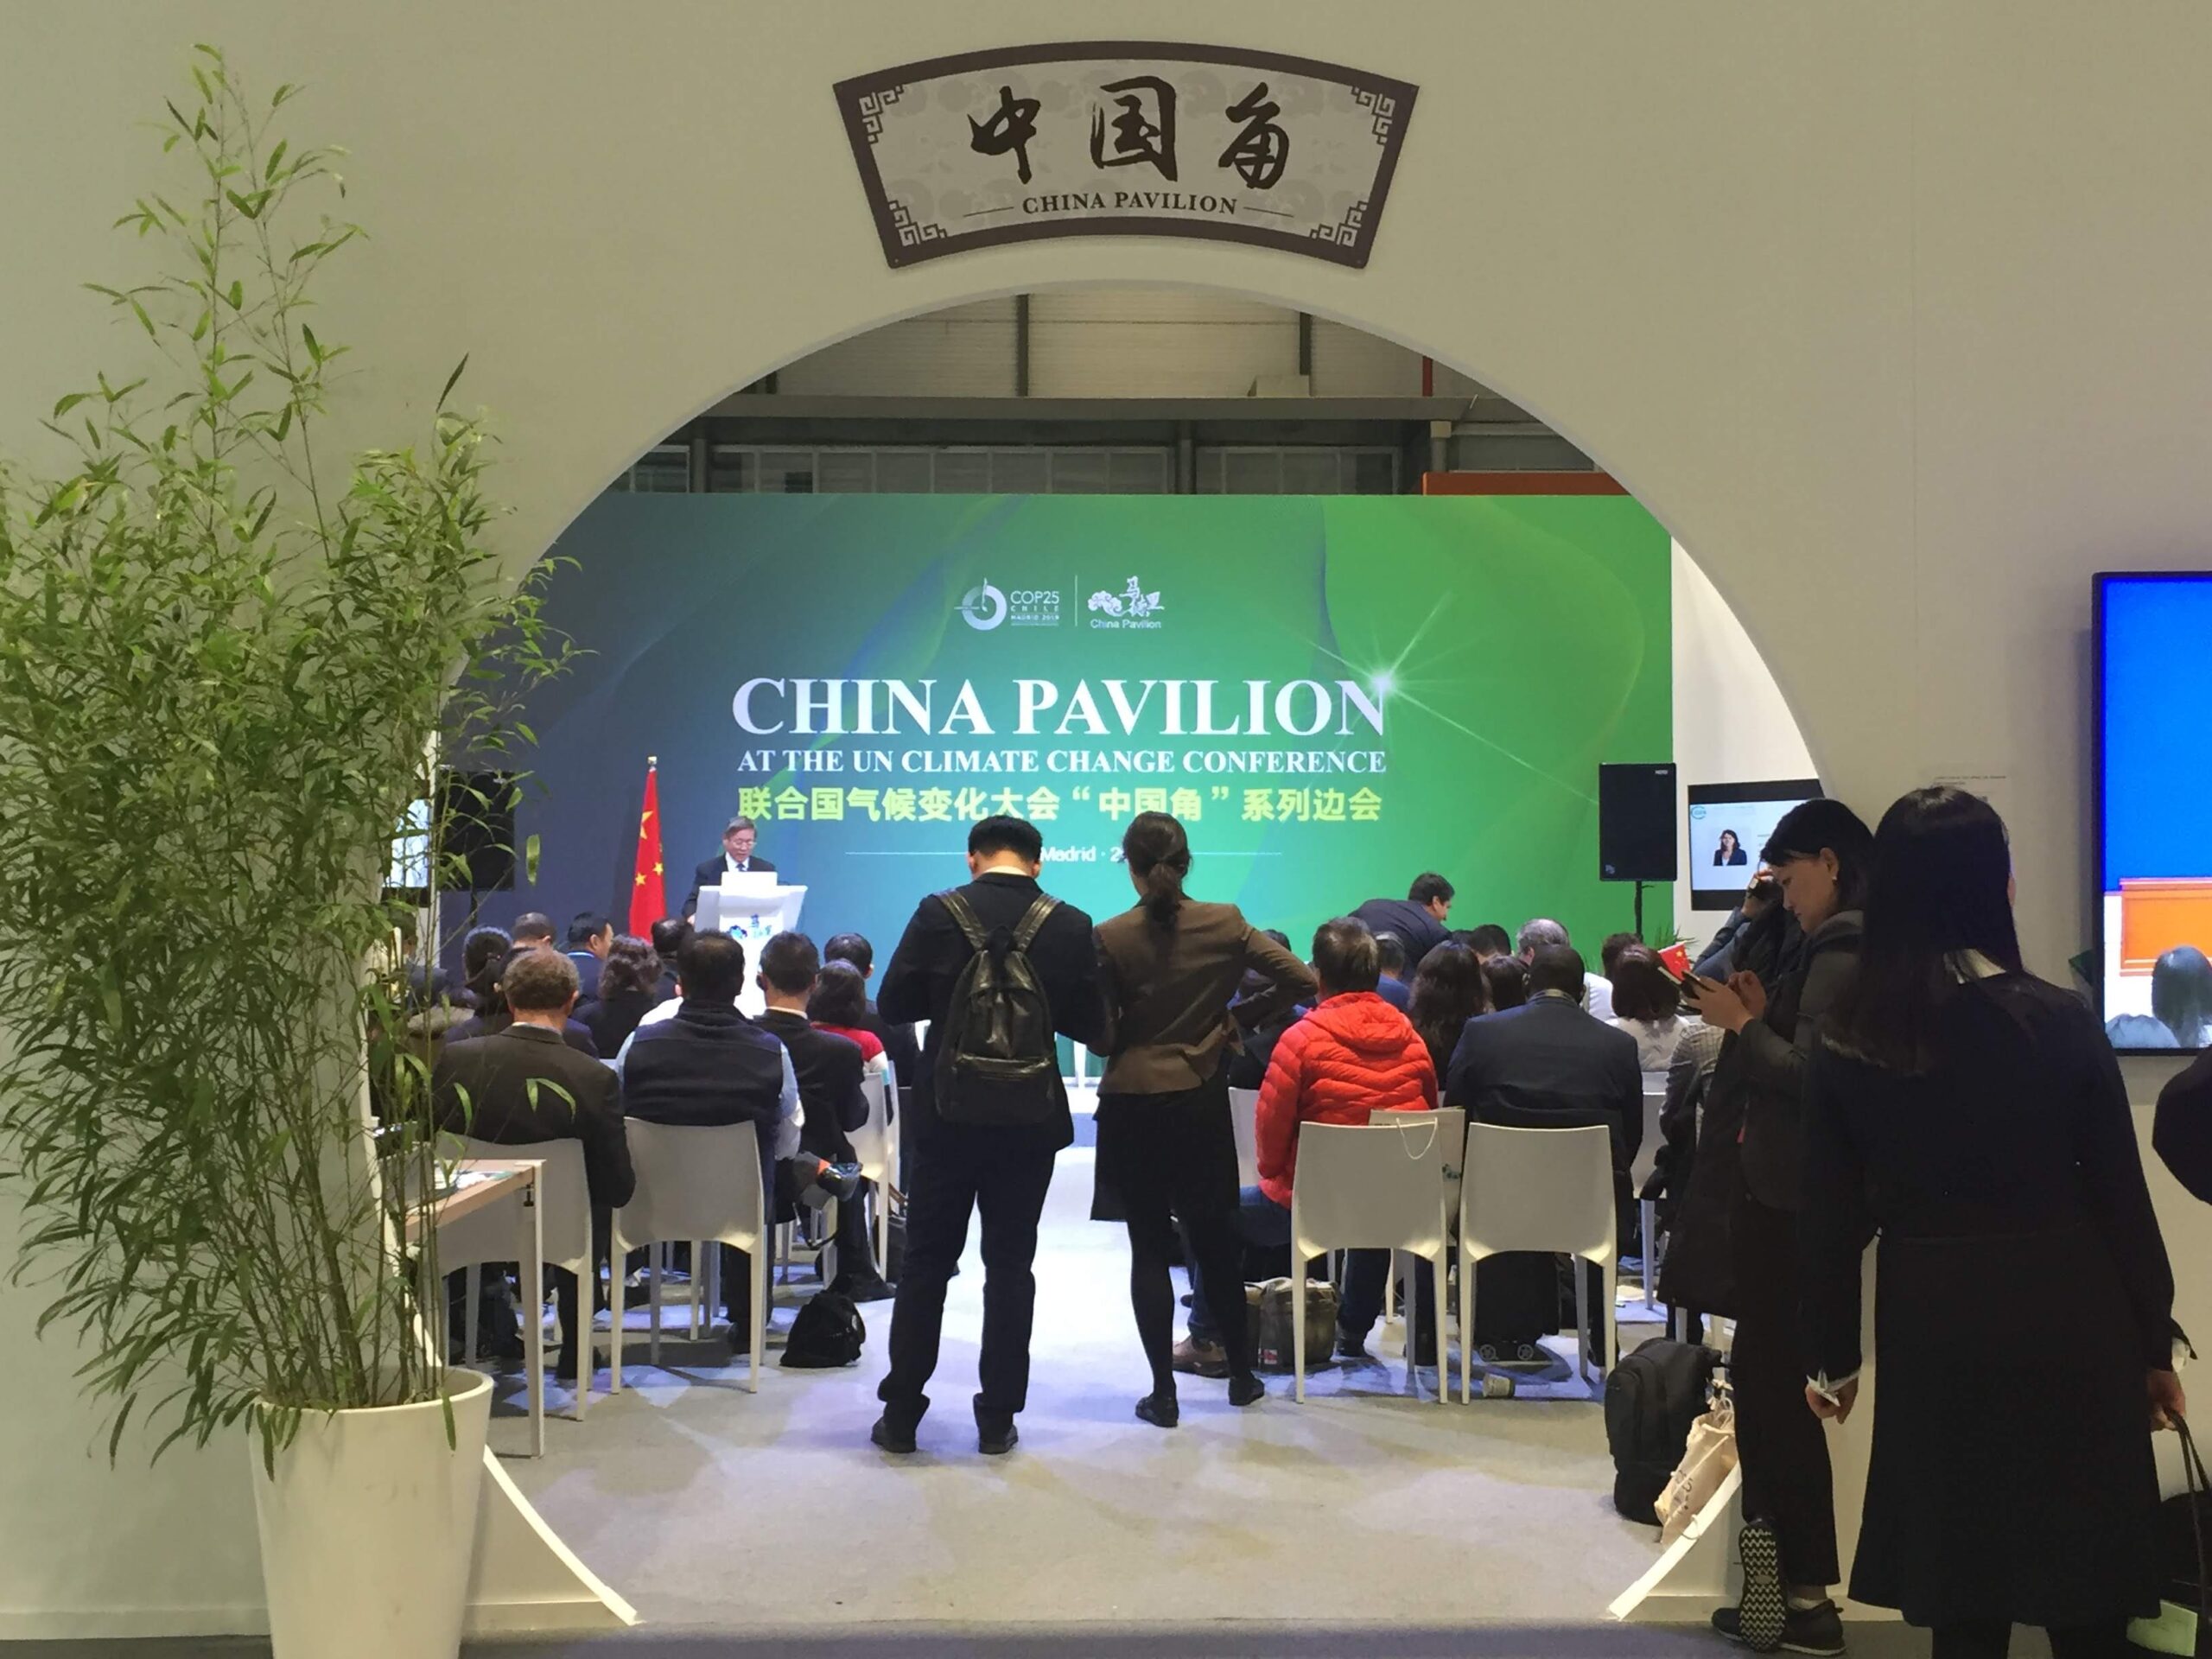 Busy China Pavilion at the COP25 in 2019